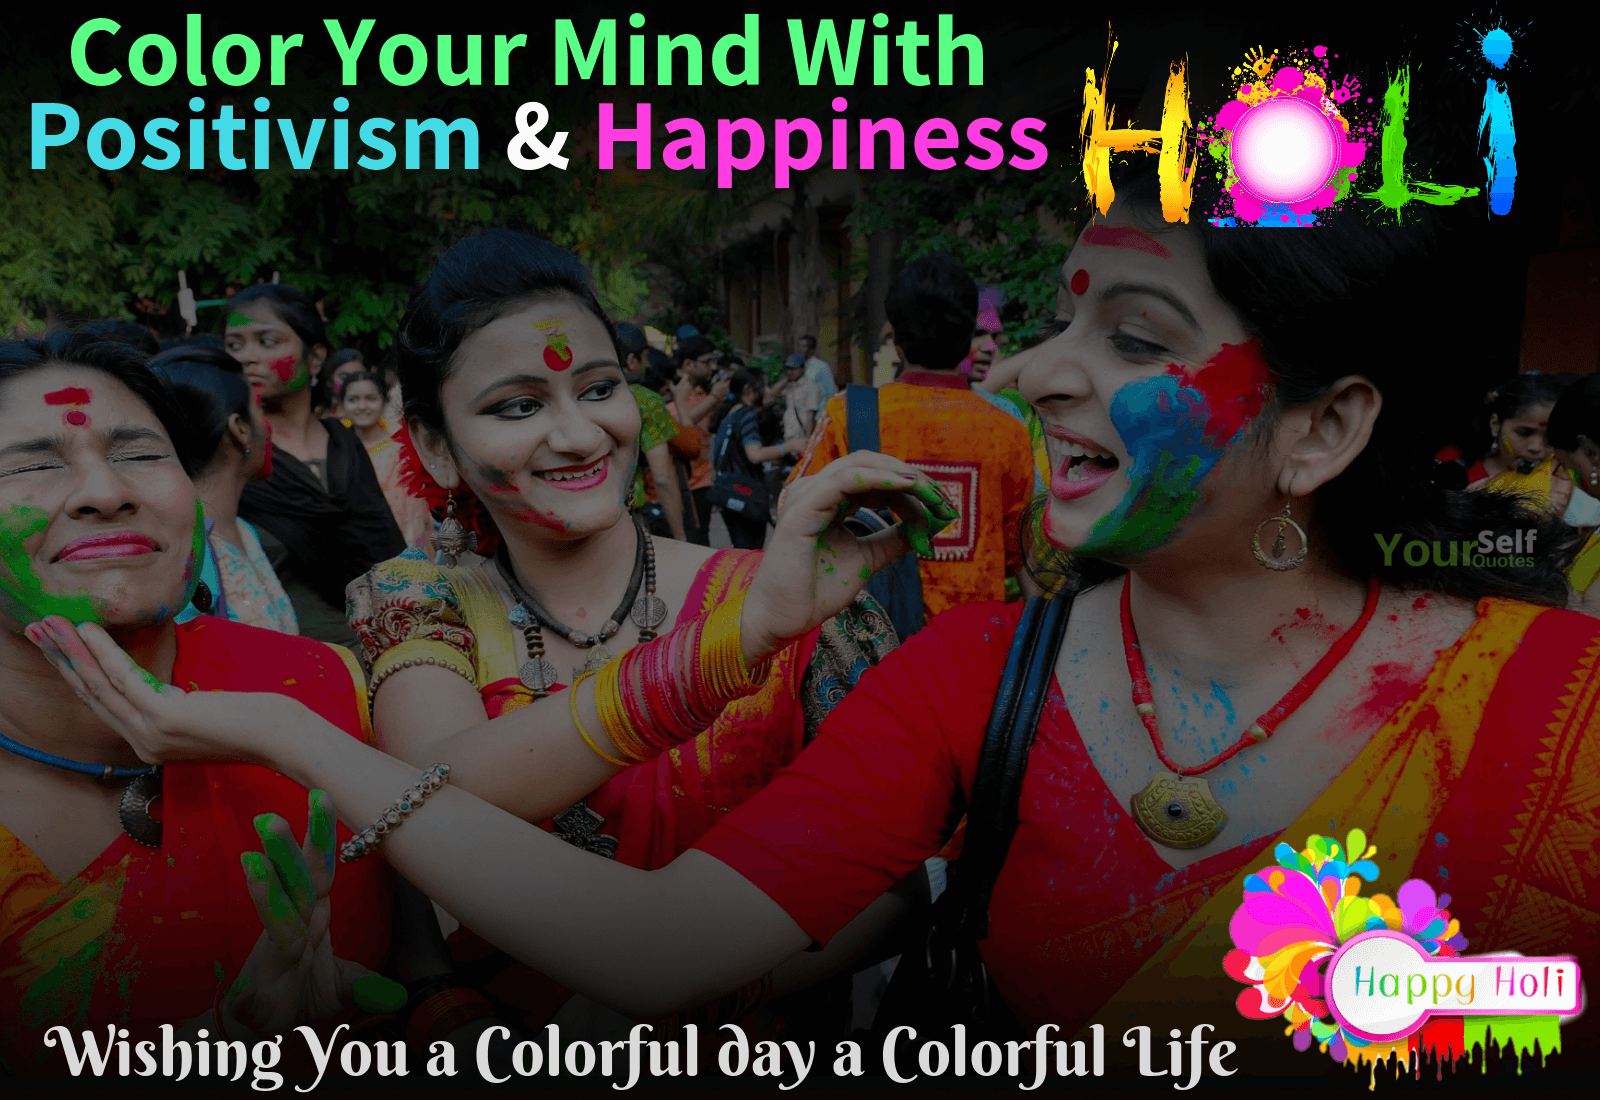 Happy Holi Wishes, Quotes, Messages To Make Your Life Colorful